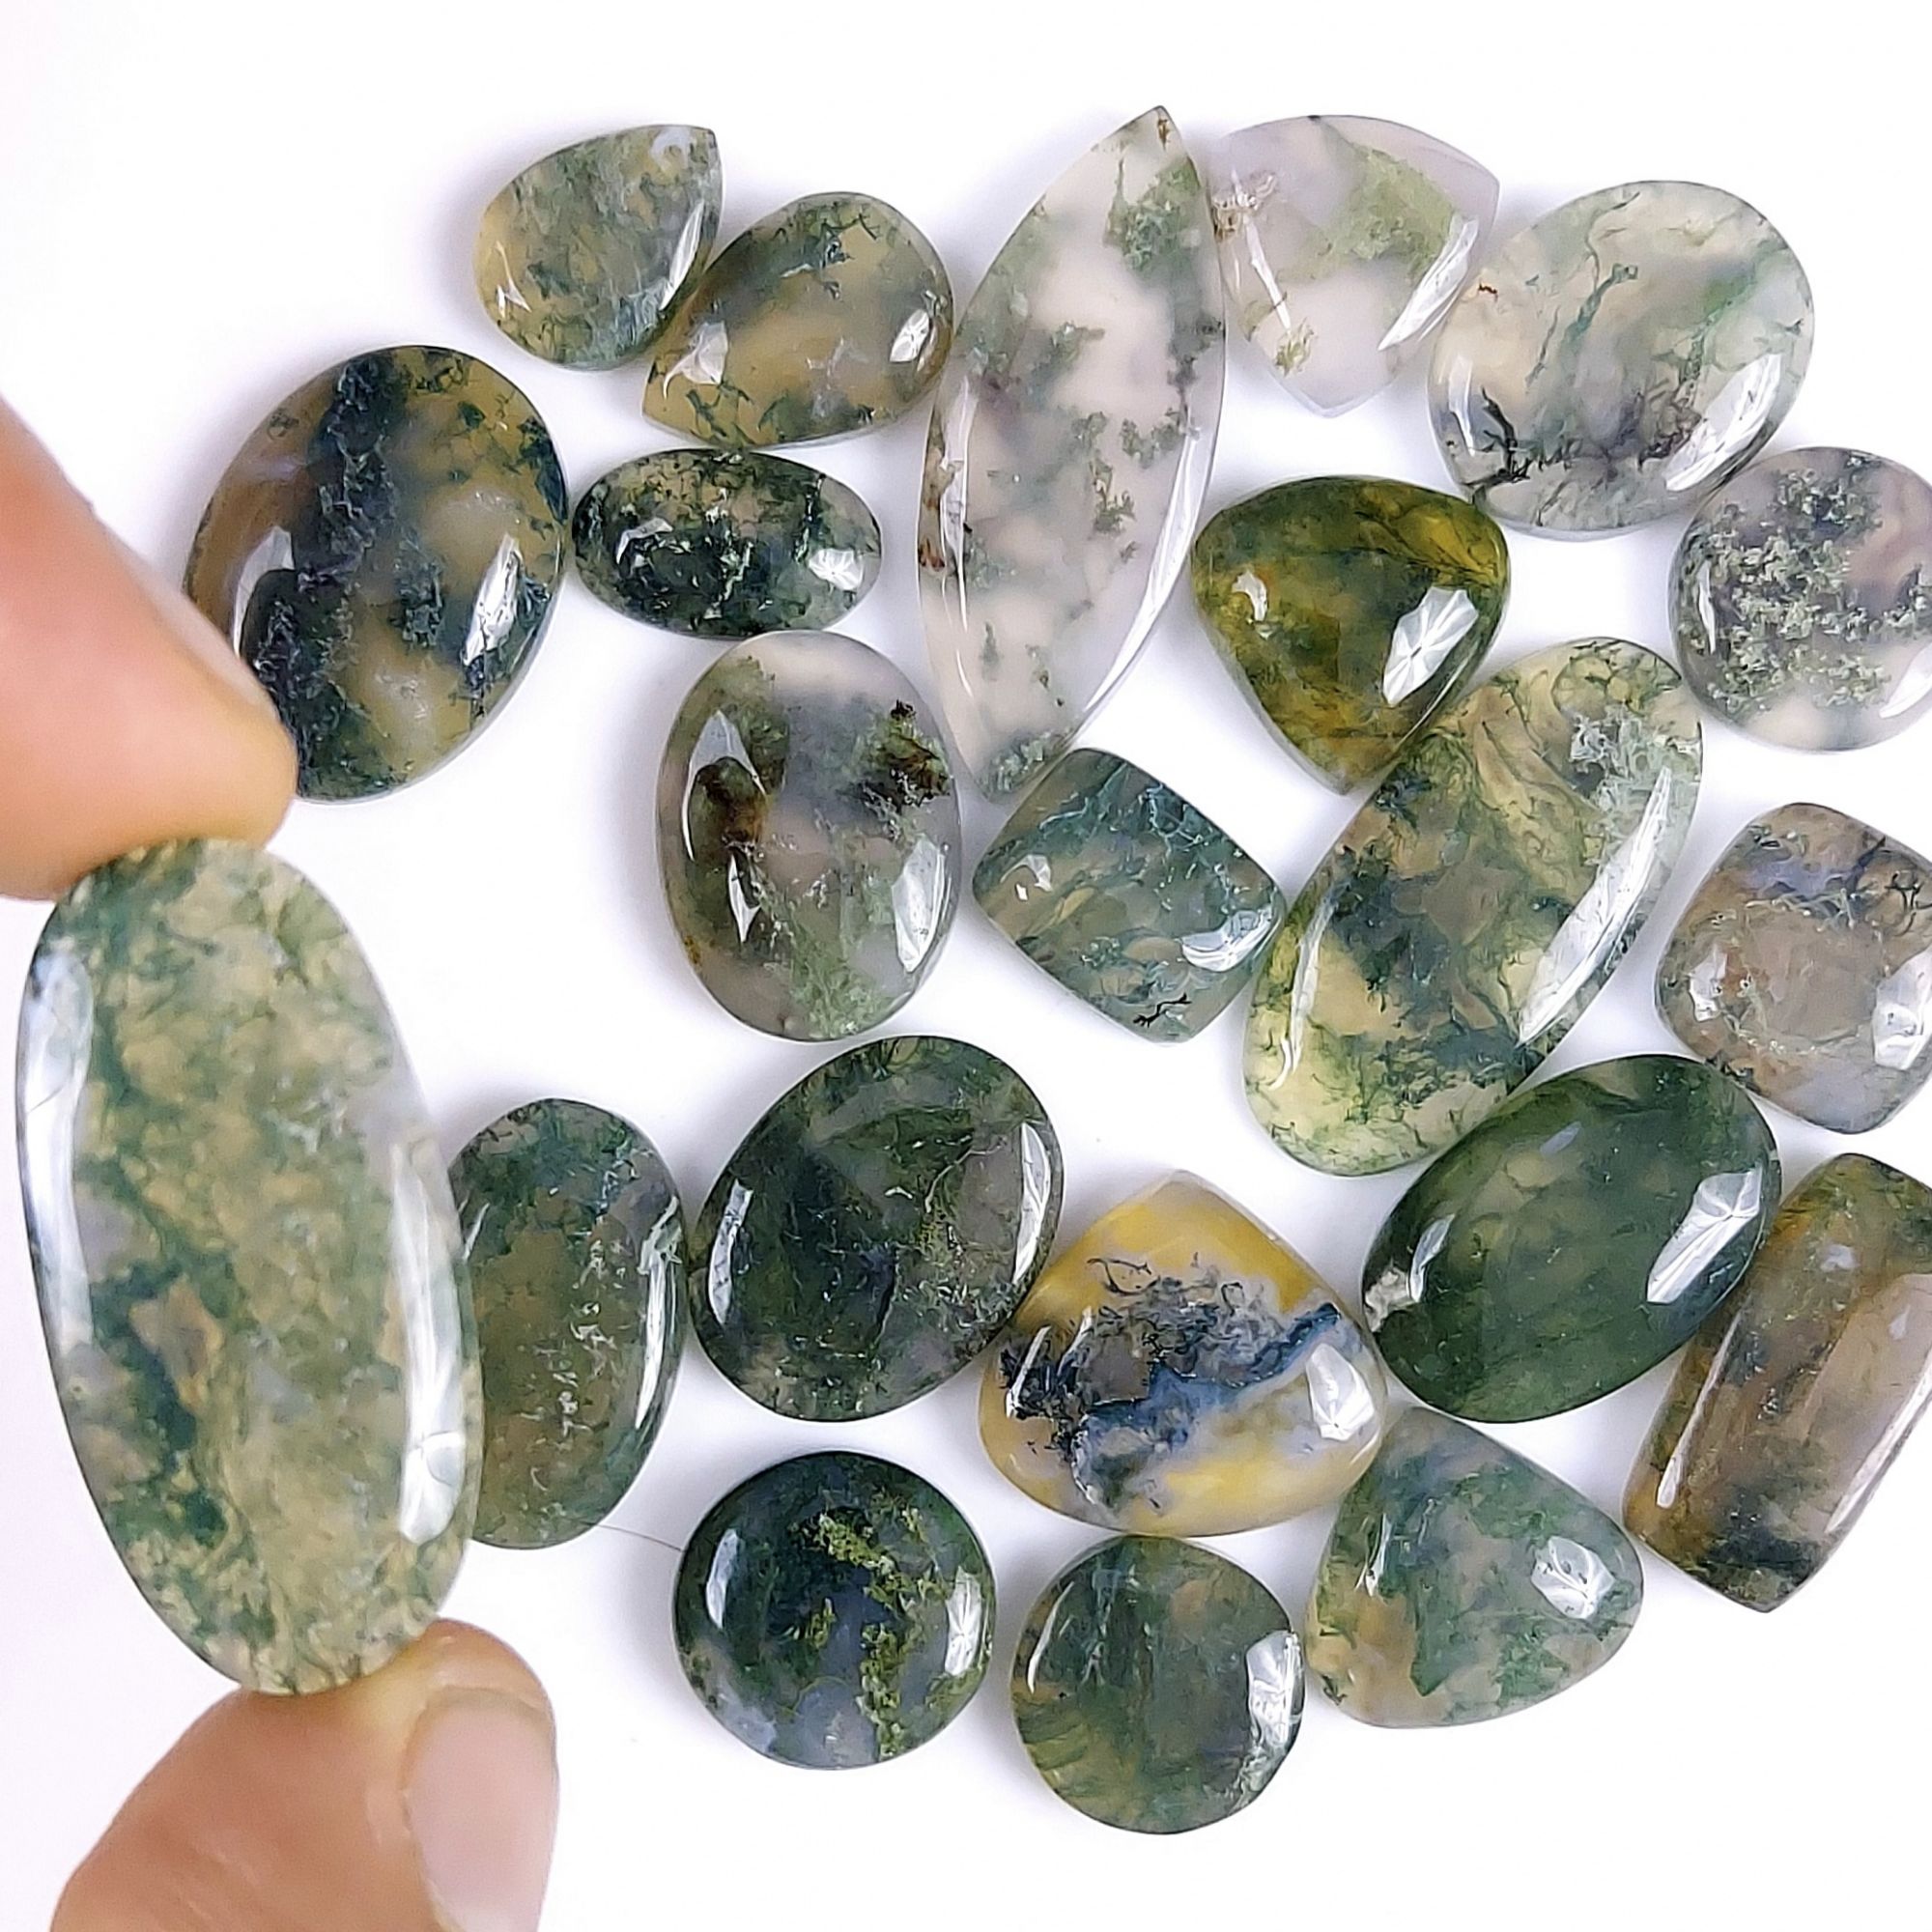 22Pcs 246Cts Natural Green Moss Agate Cabochon Lots Mixed Shapes And Sizes Moss Agate loose gemstone Cabochon Wholesale Lot 27x12 11x7mm#G-357